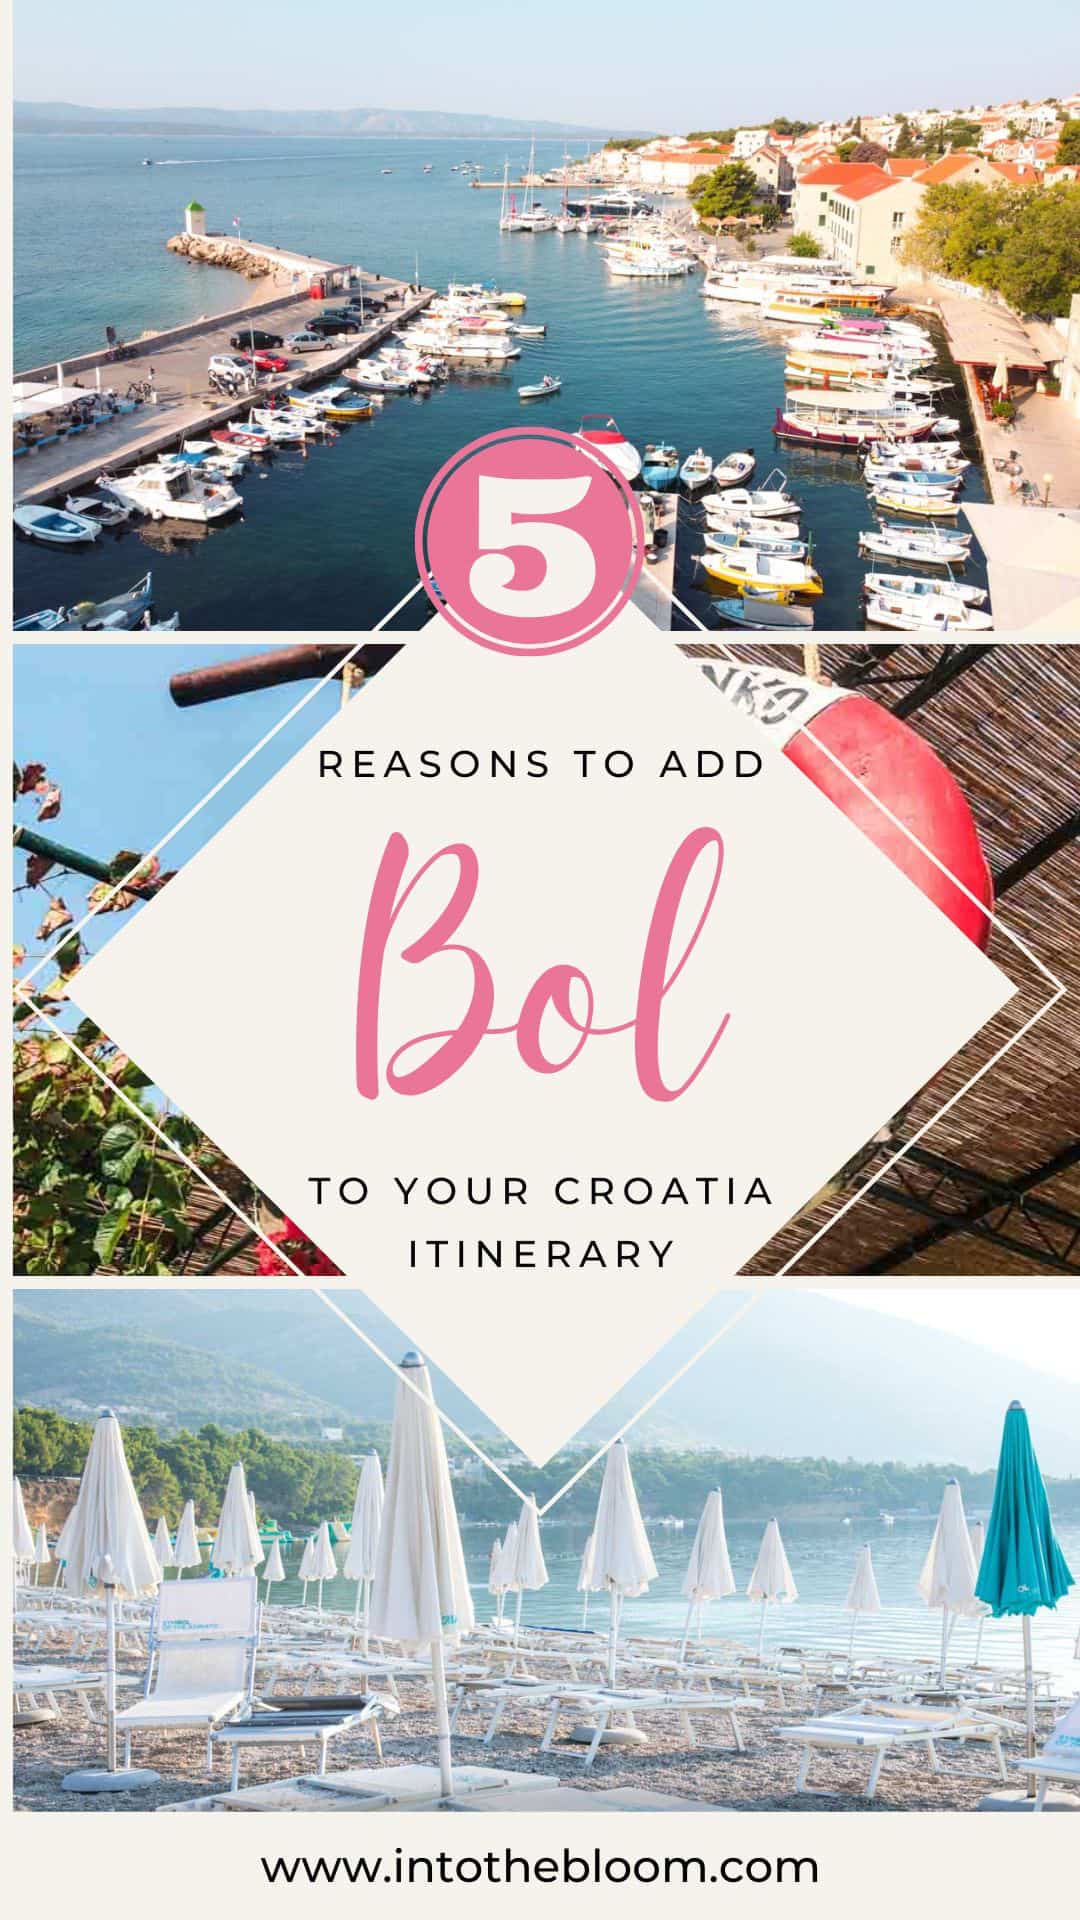 5 reasons to add Bol to your Croatia itinerary - Best things to do in Bol, Brač Island